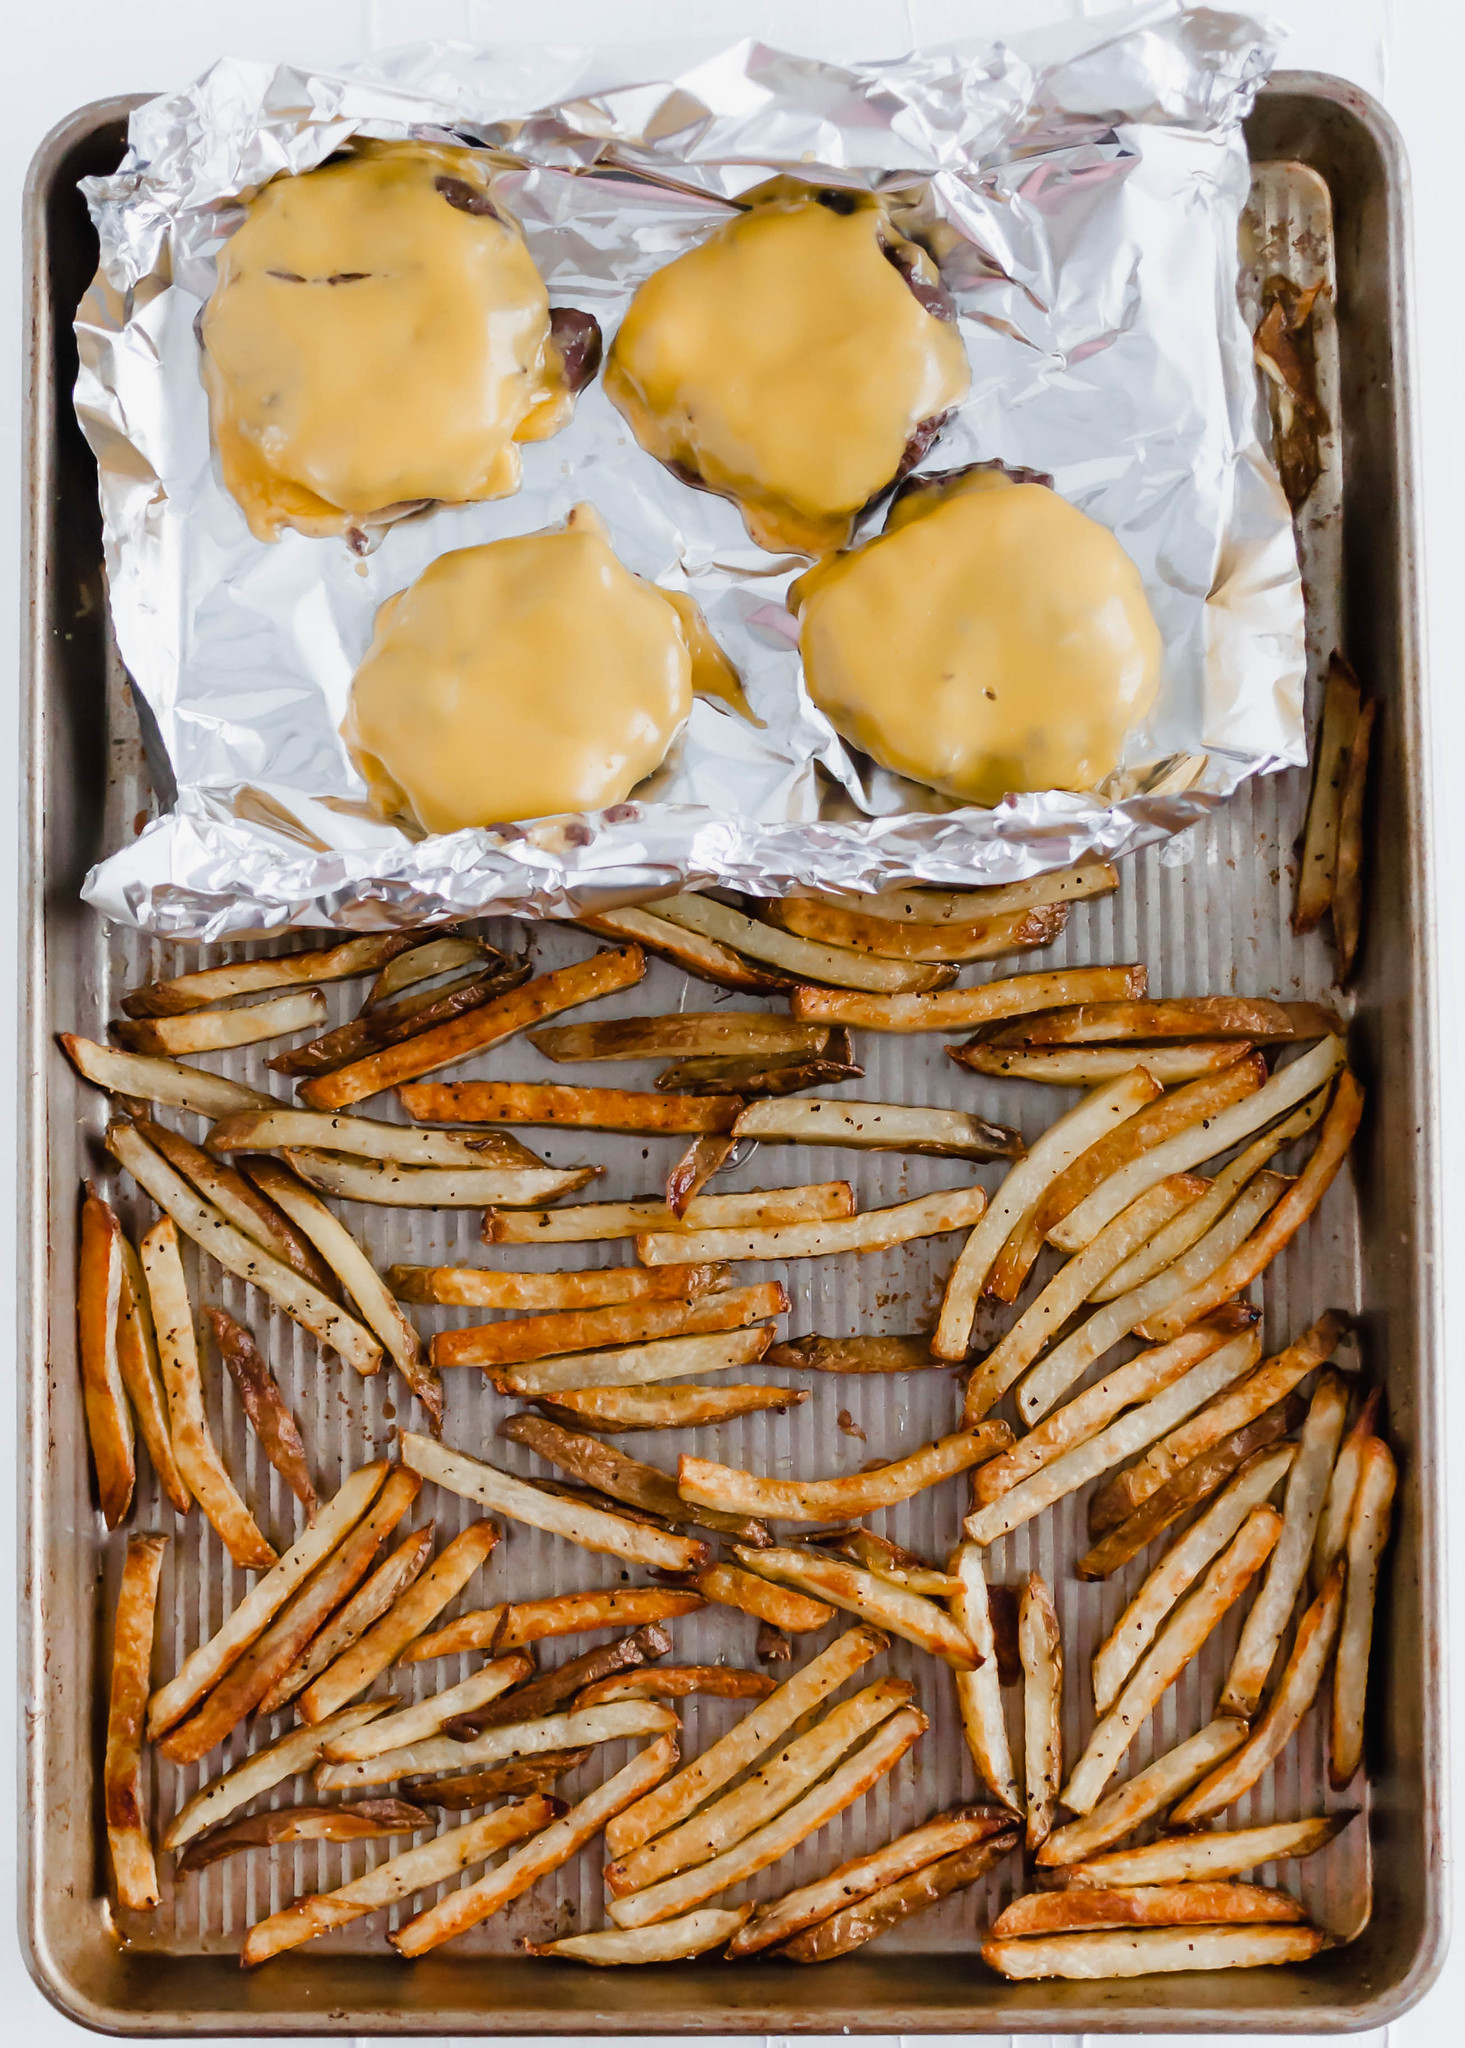 You don't need warm weather to enjoy a burger at home. These Sheet Pan Burgers and Fries are super simple to make all on one pan. A great, simple weeknight meal.